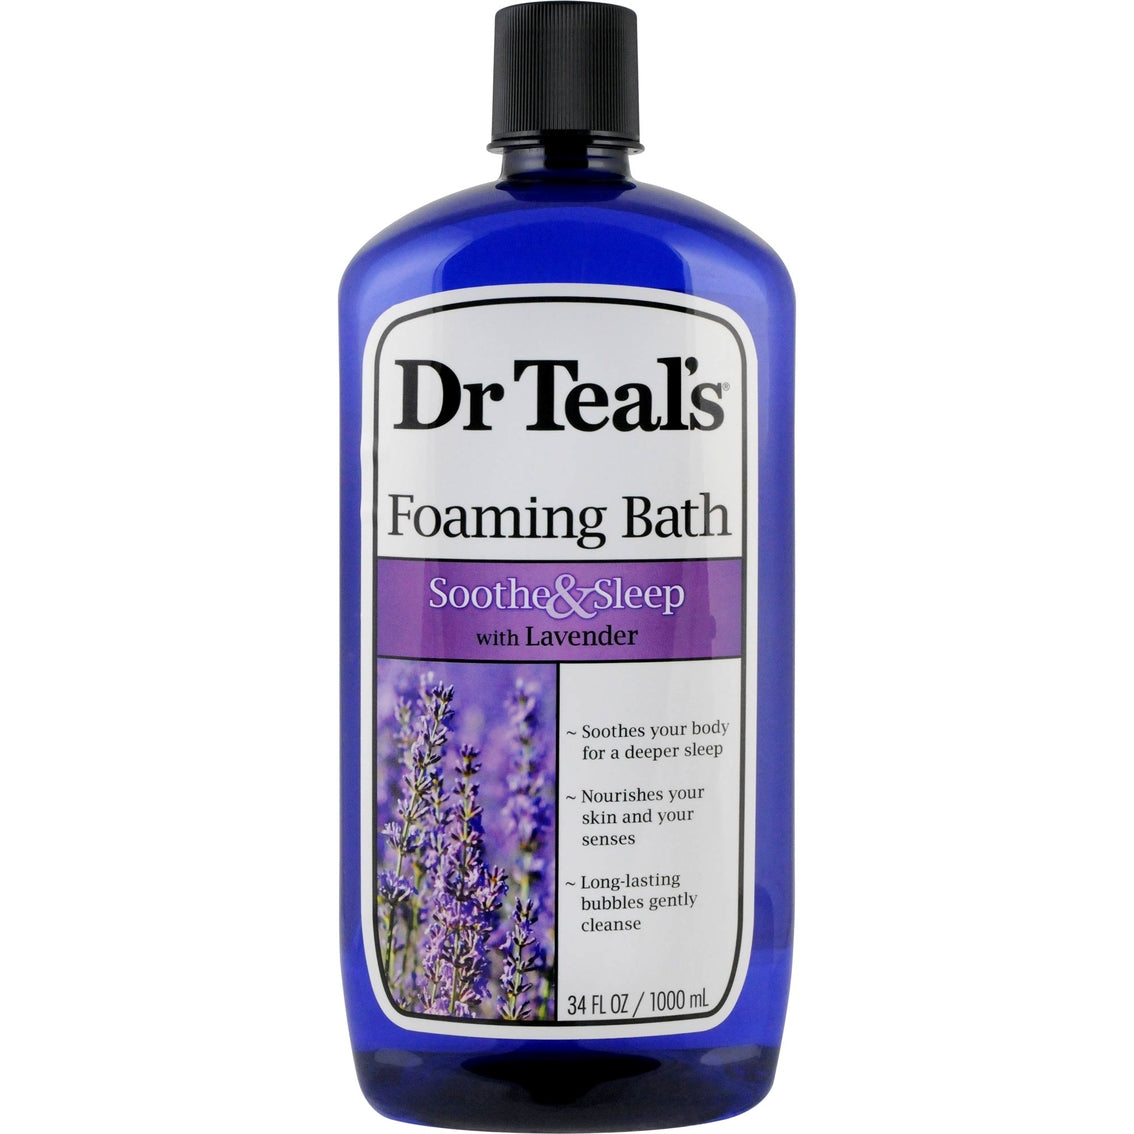 Dr. Teal's Soothe and Sleep Foaming Bath with Lavender 34oz